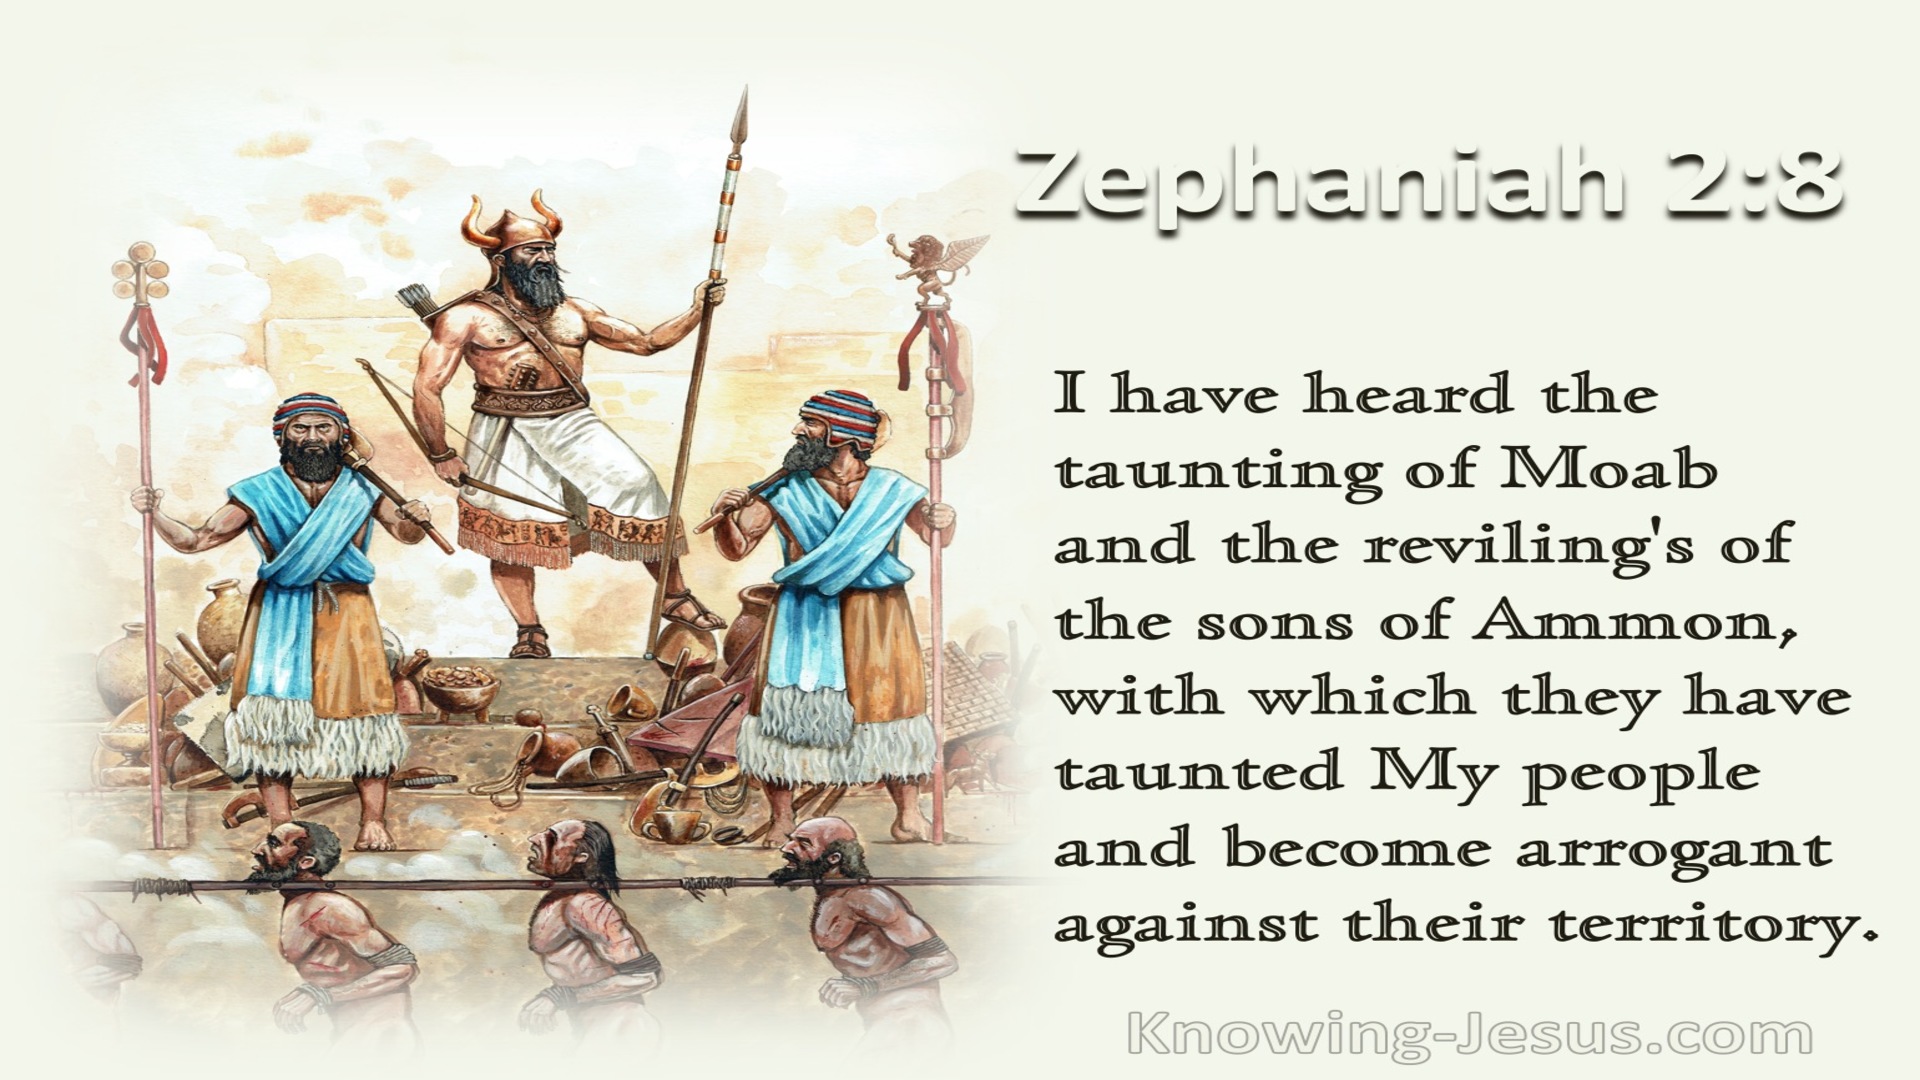 Zephaniah 2:8 The Taunting Of Moab And The Revilings Of The Sons Of Ammon (cream)